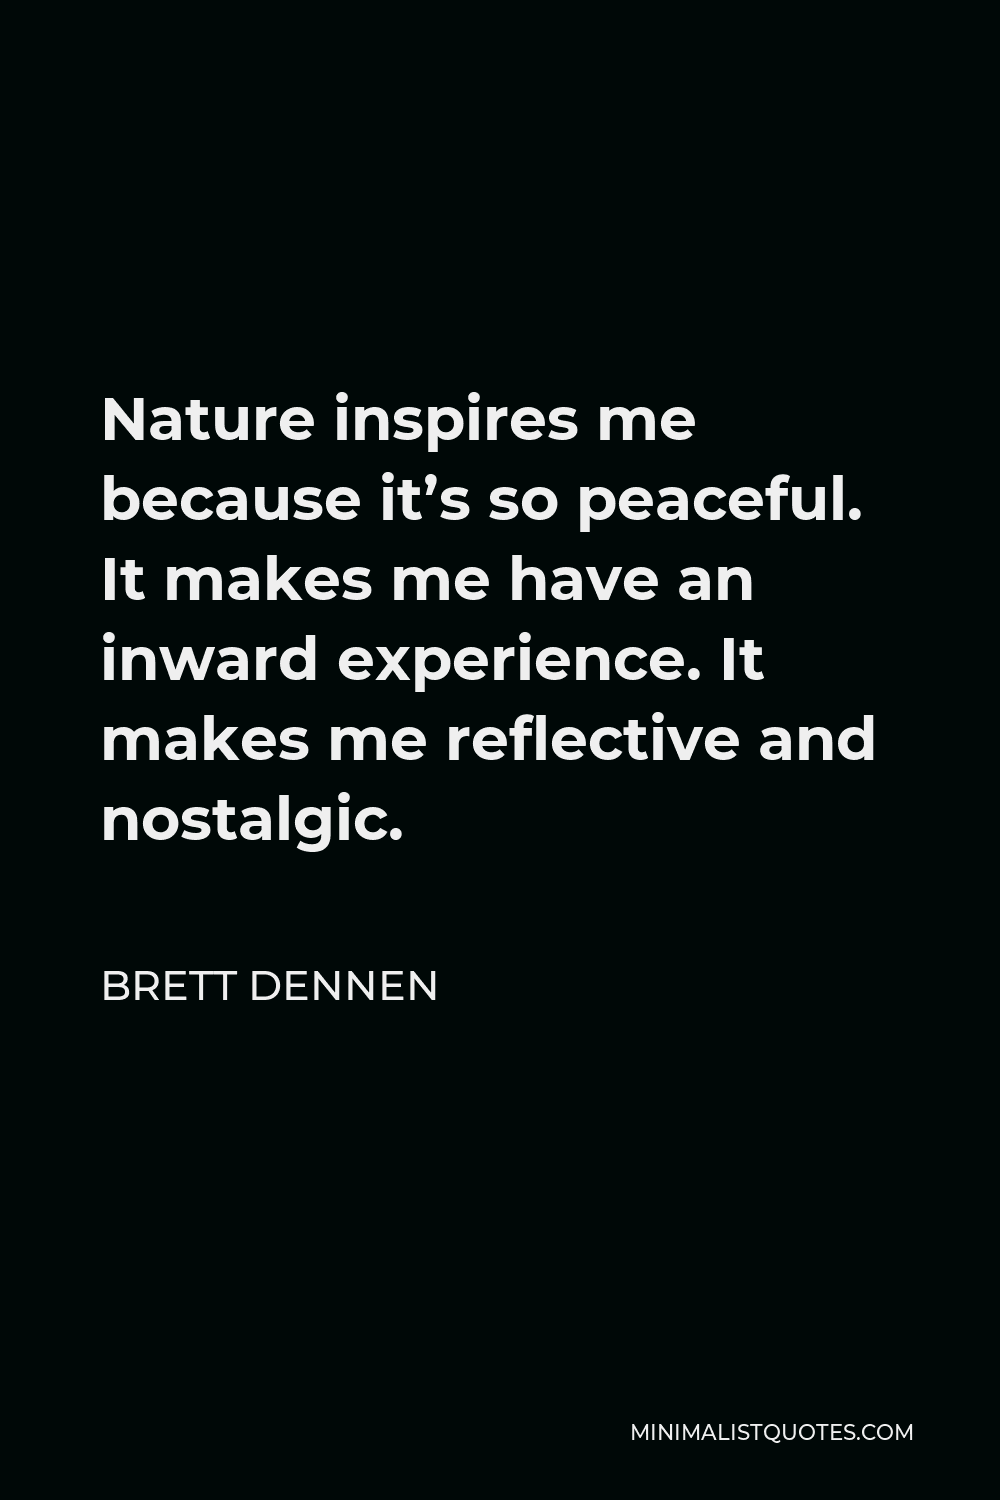 Brett Dennen Quote - Nature inspires me because it’s so peaceful. It makes me have an inward experience. It makes me reflective and nostalgic.